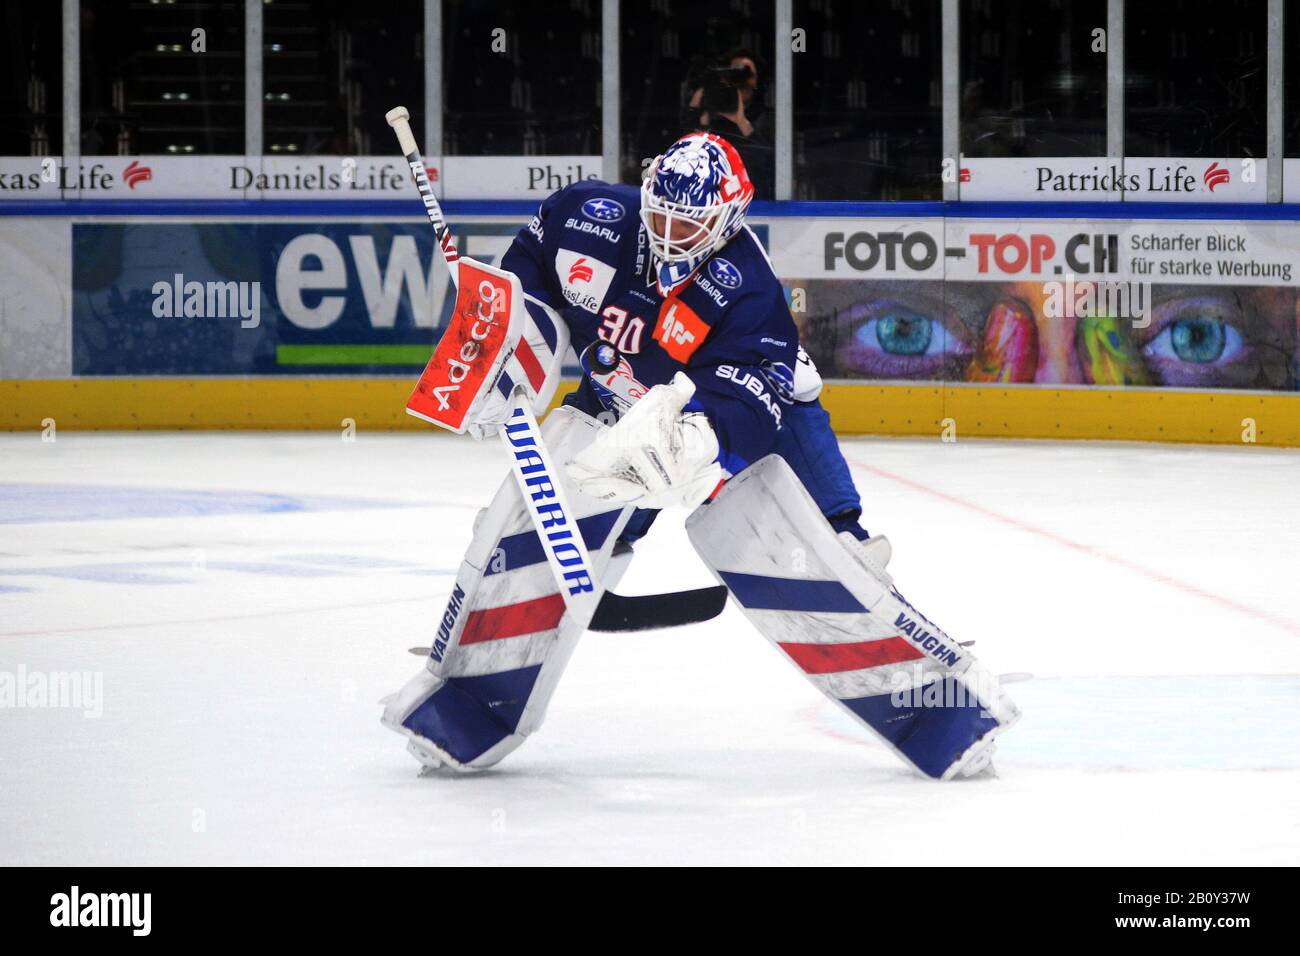 21.2.2020, Zürich, Hallenstadion, NL: ZSC Lions - HC Ambrì Piotta, goalie Lukas Flüeler (ZSC)ZSC plays at home vs HC Ambri-Piotta for one of the last home game in NLA regular season 2020. ZSC Lions Zurich host HC Ambri Piotta. Lions won 3-1 after a hard game. (Photo by Sergio Brunetti/Pacific Press) Stock Photo